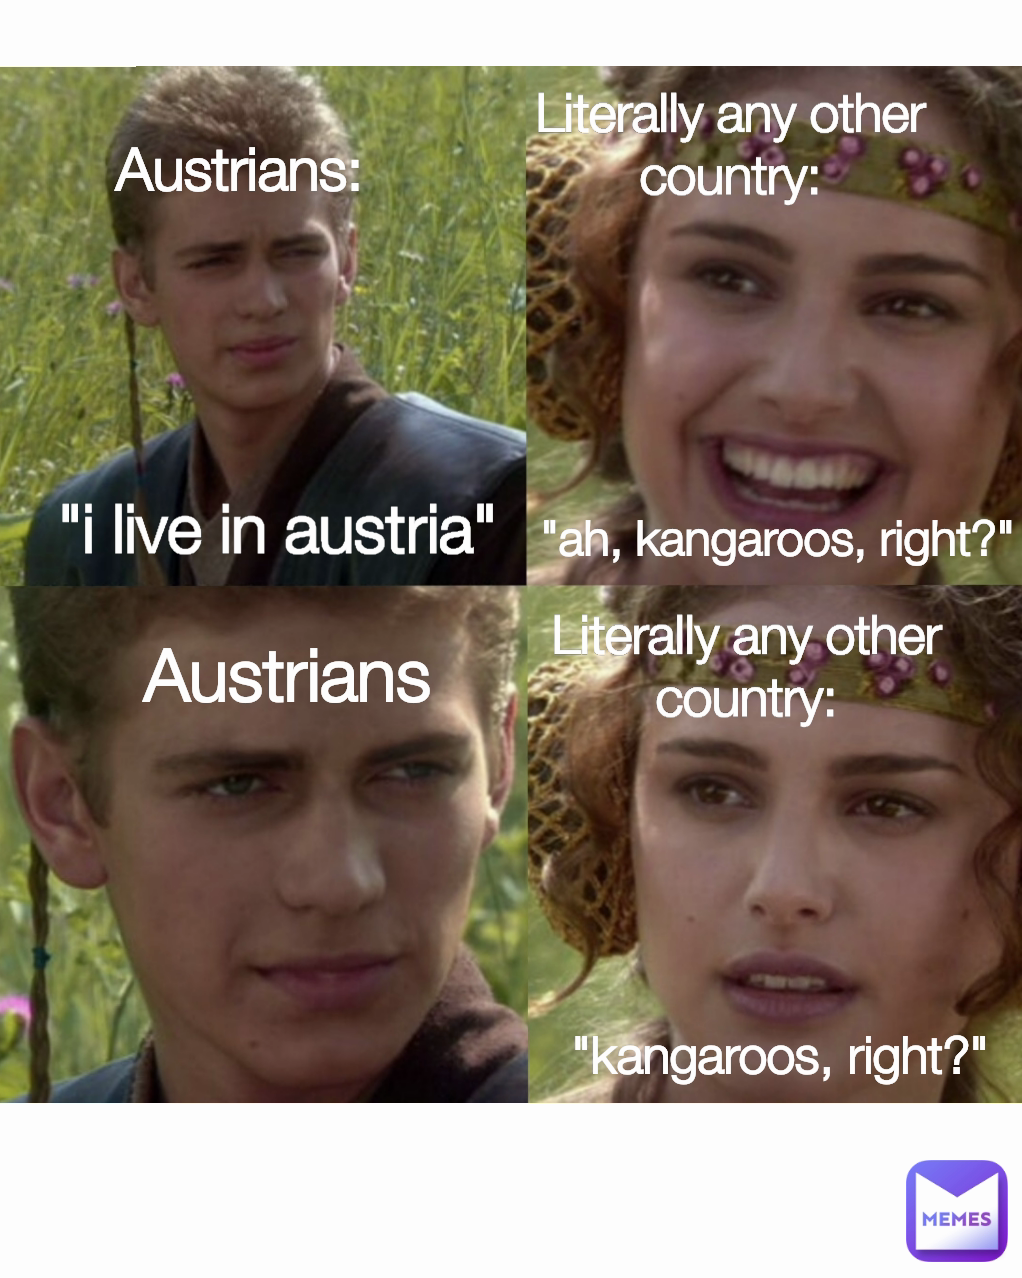 Austrians Literally any other country: Literally any other country: "kangaroos, right?" "i live in austria" Austrians: "ah, kangaroos, right?"